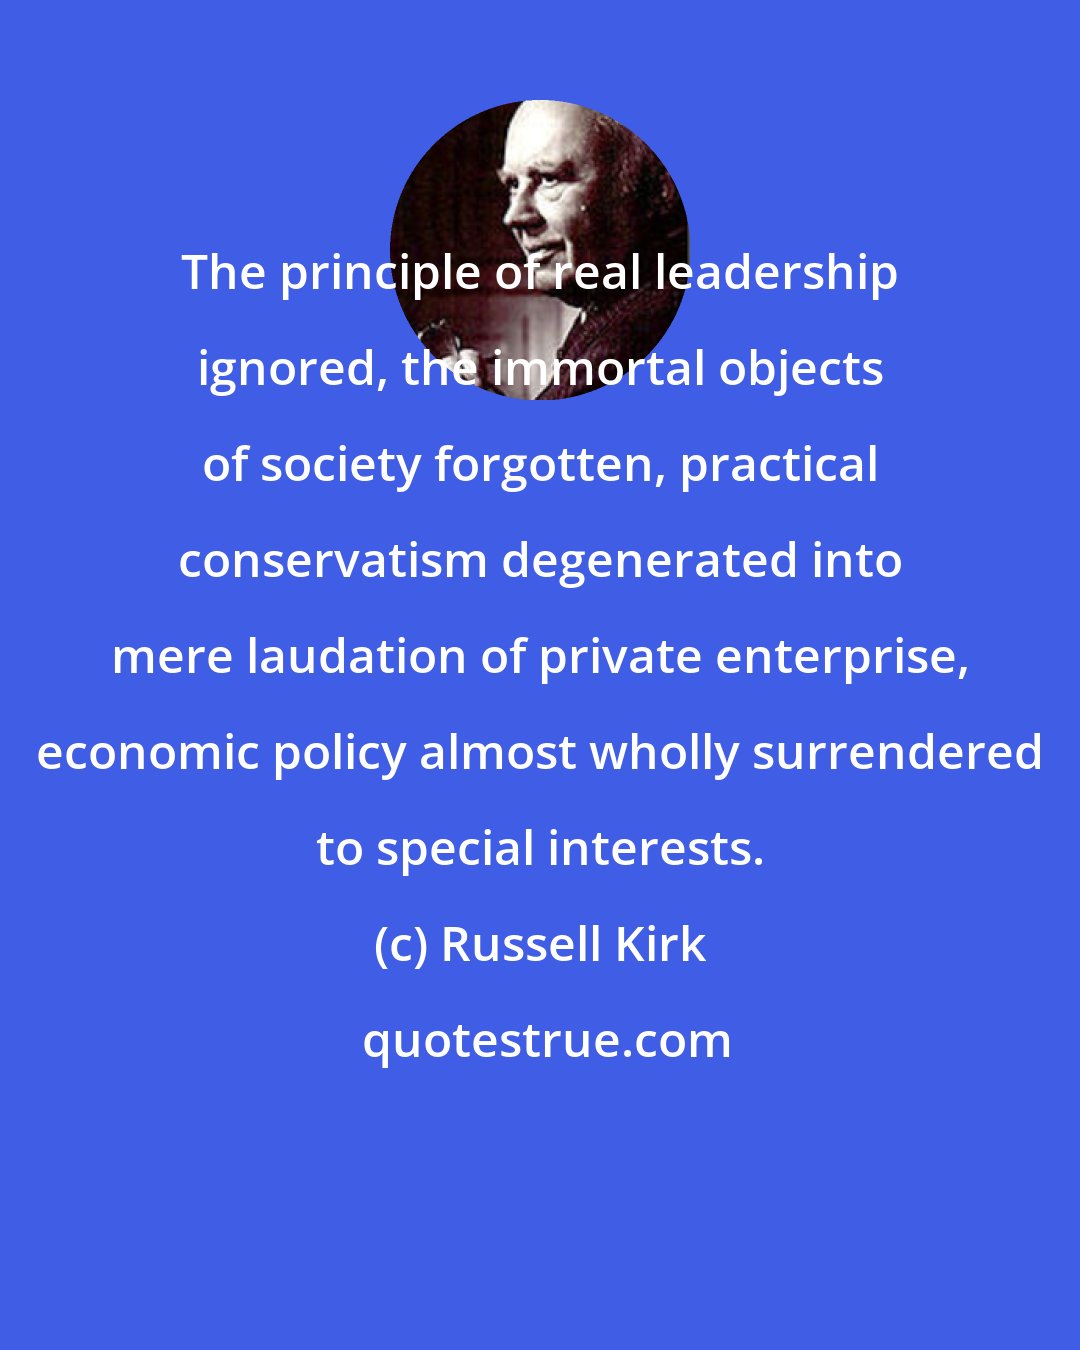 Russell Kirk: The principle of real leadership ignored, the immortal objects of society forgotten, practical conservatism degenerated into mere laudation of private enterprise, economic policy almost wholly surrendered to special interests.